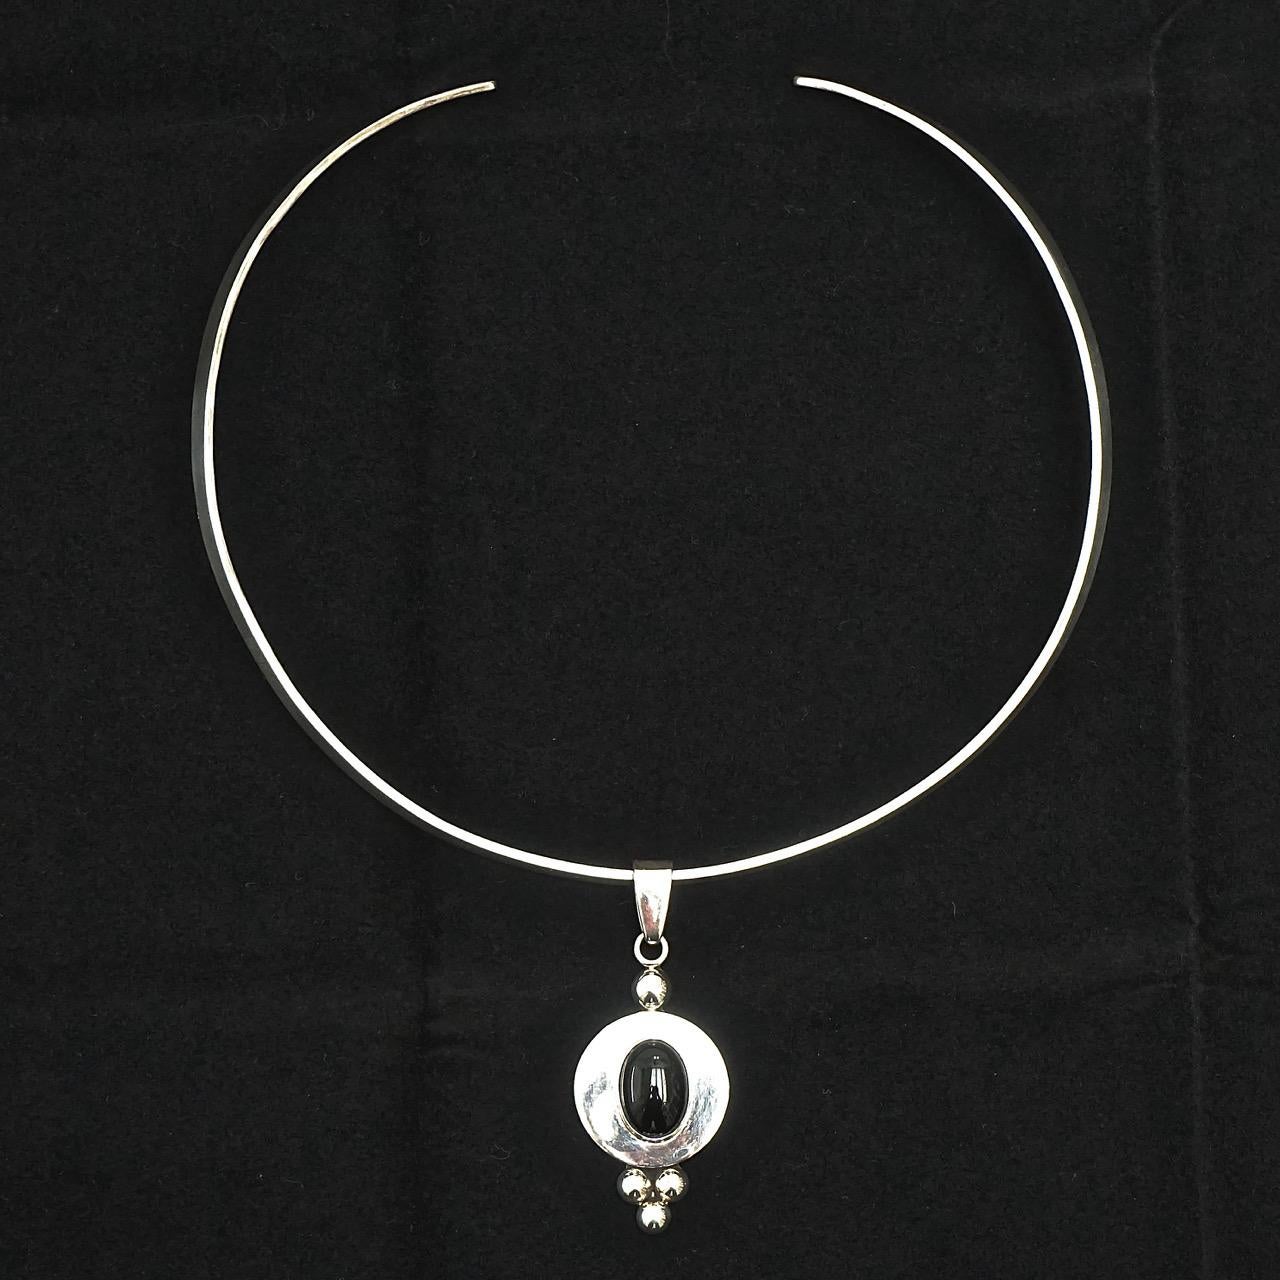 Mexico Sterling Silver Torque Collar Necklace with Silver and Onyx Pendant For Sale 1